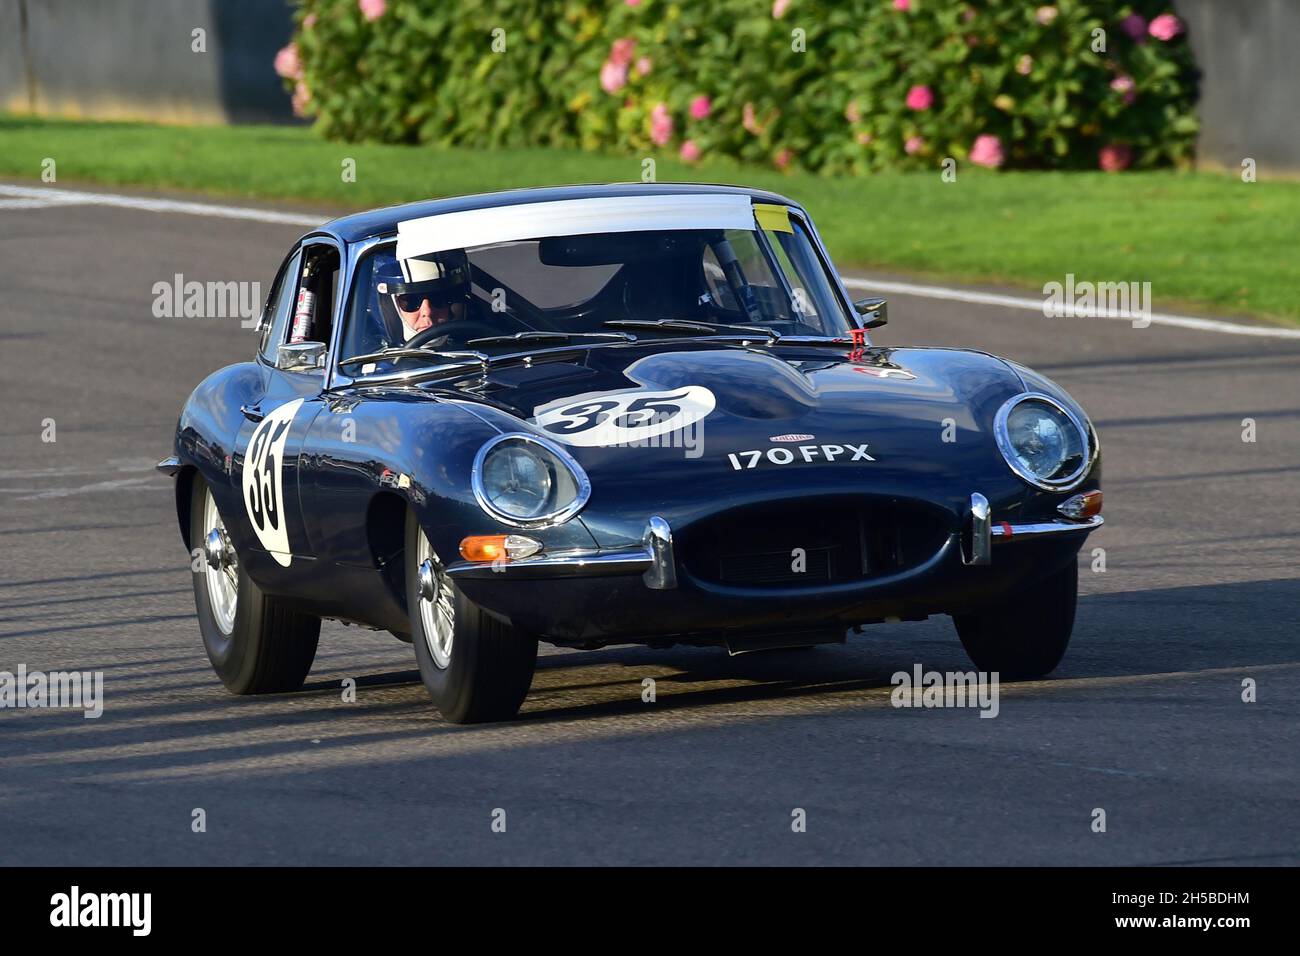 Andrew Hayden, Jaguar E-Type FHC, Moss Trophy, Closed cockpit prototypes and GT cars the tone of the RAC TT races that ran between 1958 and 1962, Good Stock Photo